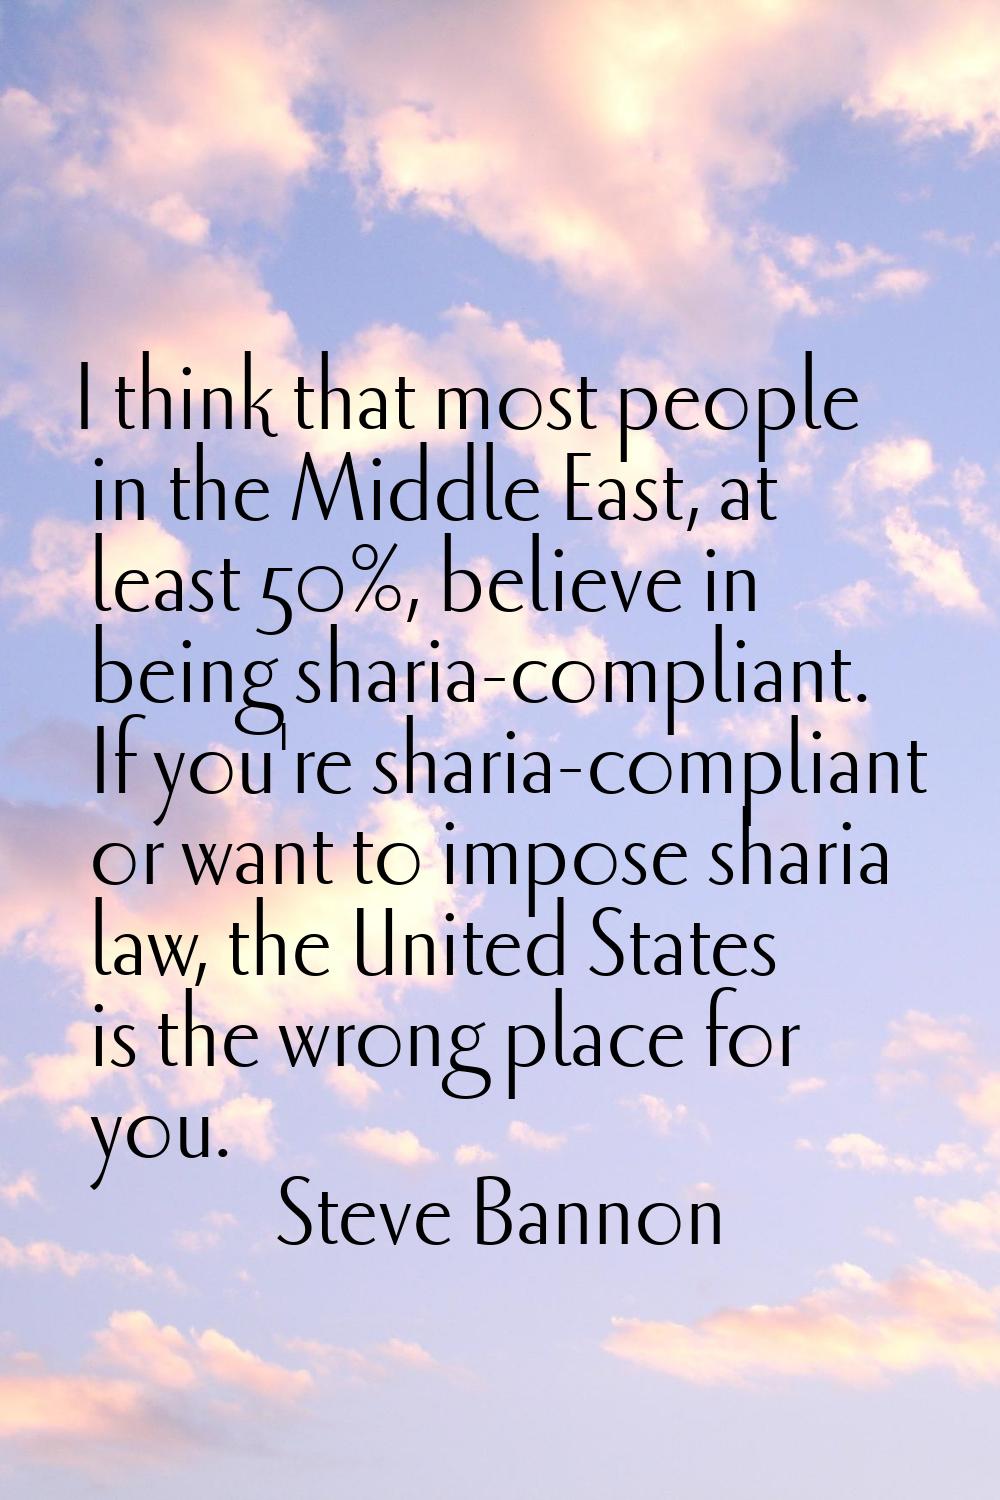 I think that most people in the Middle East, at least 50%, believe in being sharia-compliant. If yo